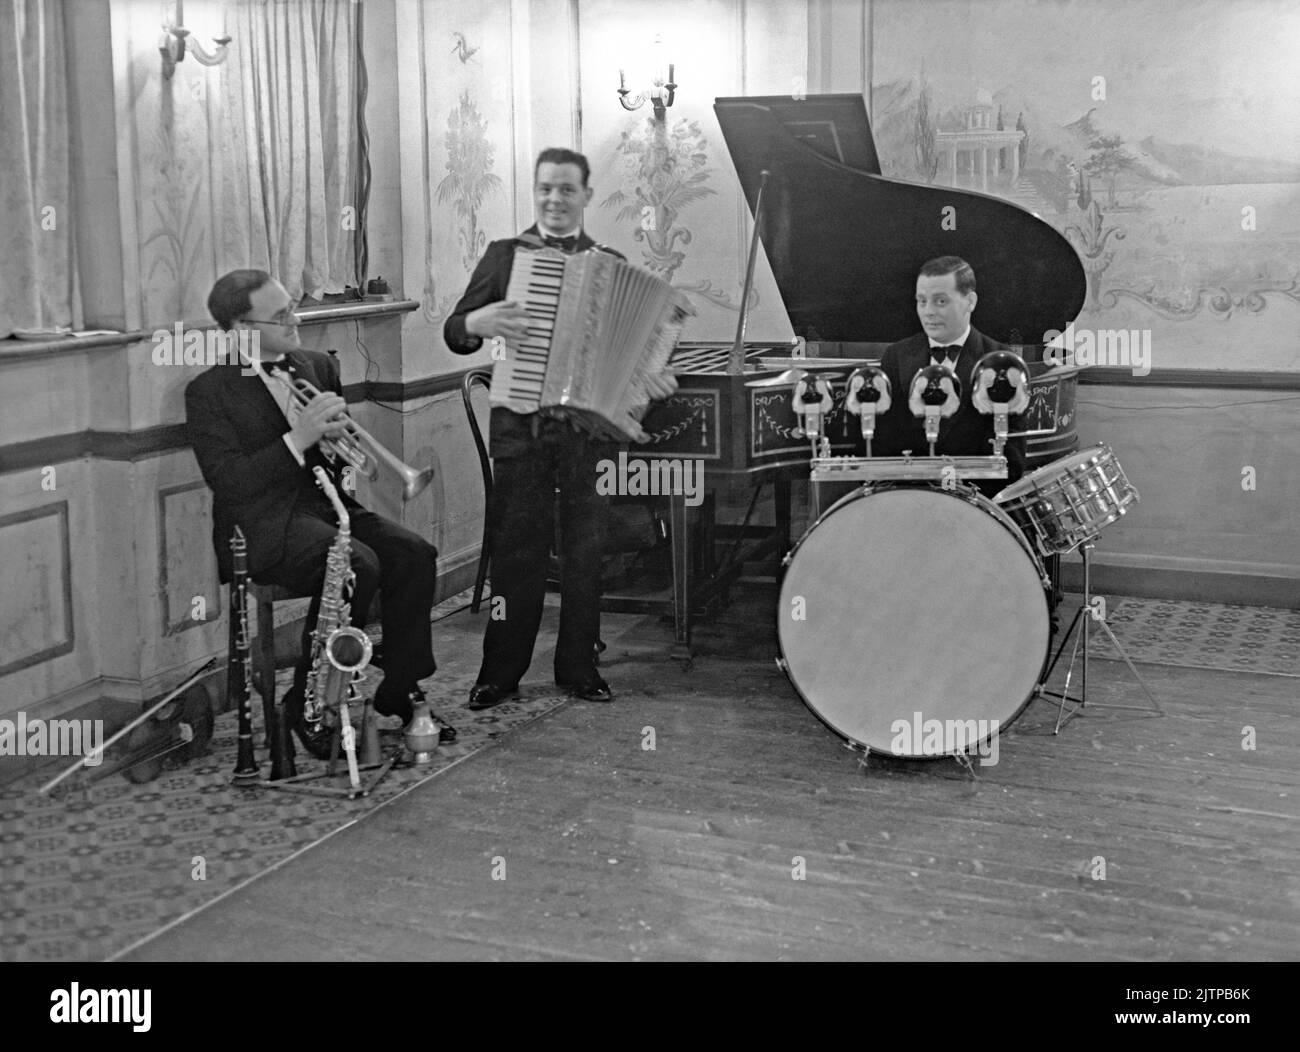 A British dance band, the W Johnson Trio, at the Unity Hall, Brixton, London, UK in January 1938. Early dance and swing bands had their heyday in the UK during the 1920s–30s. Bands played in dance halls and hotel ballrooms. They played melodic, good-time music and individual players would play in several bands. This image is from an old glass negative – a vintage 1930s photograph. Stock Photo